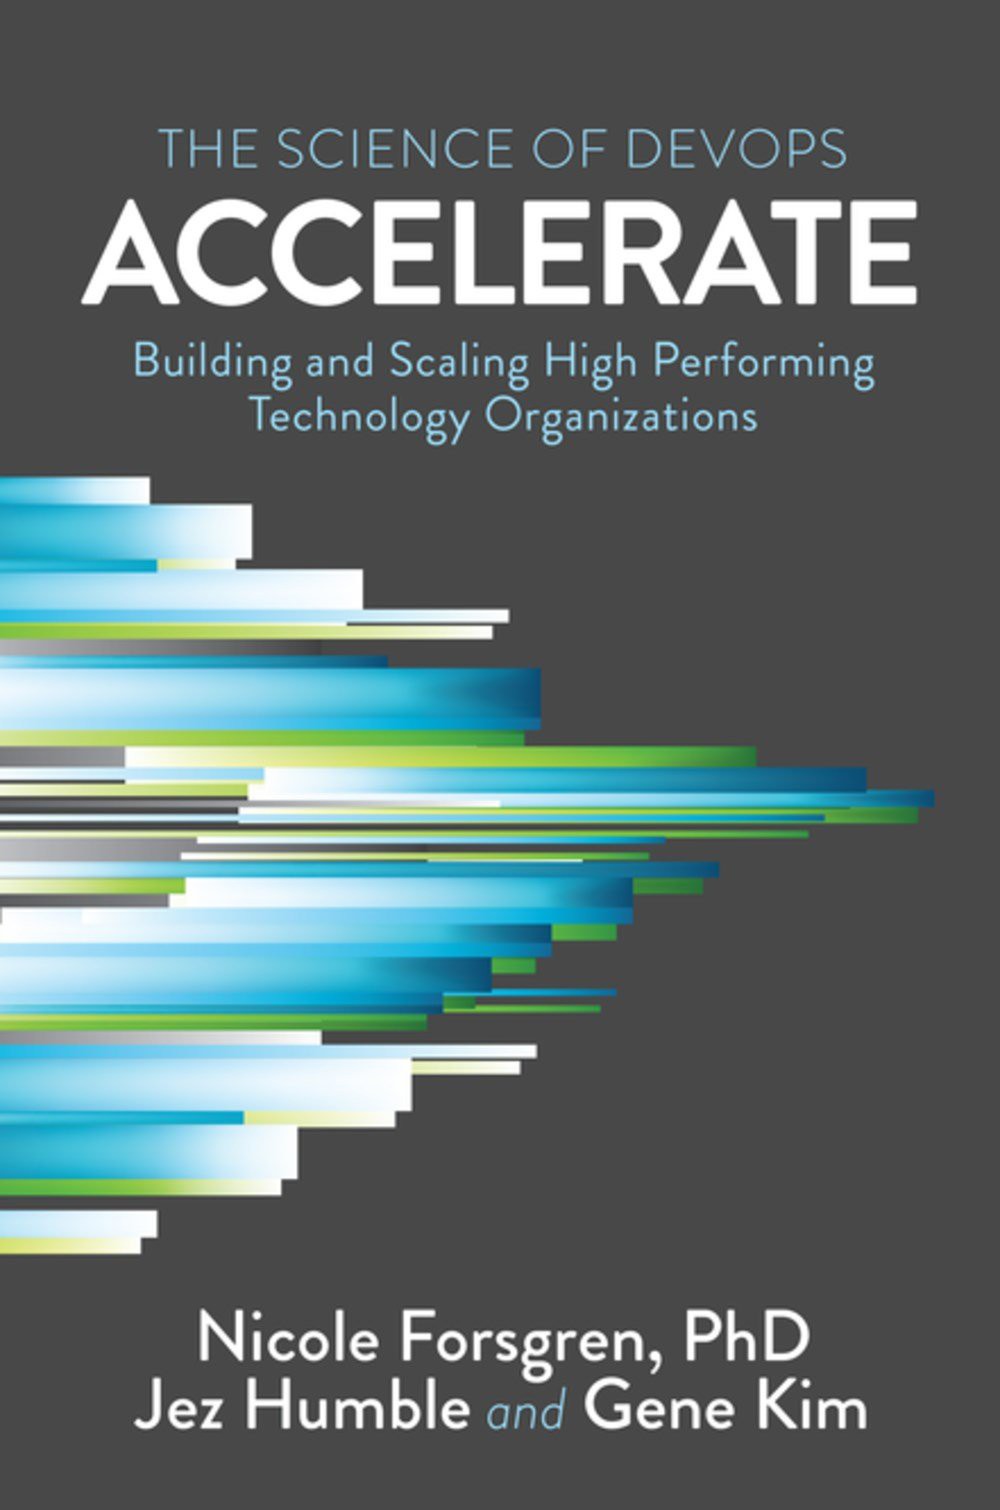 Accelerate: The Science Behind DevOps: Building and Scaling High Performing Technology Organizations